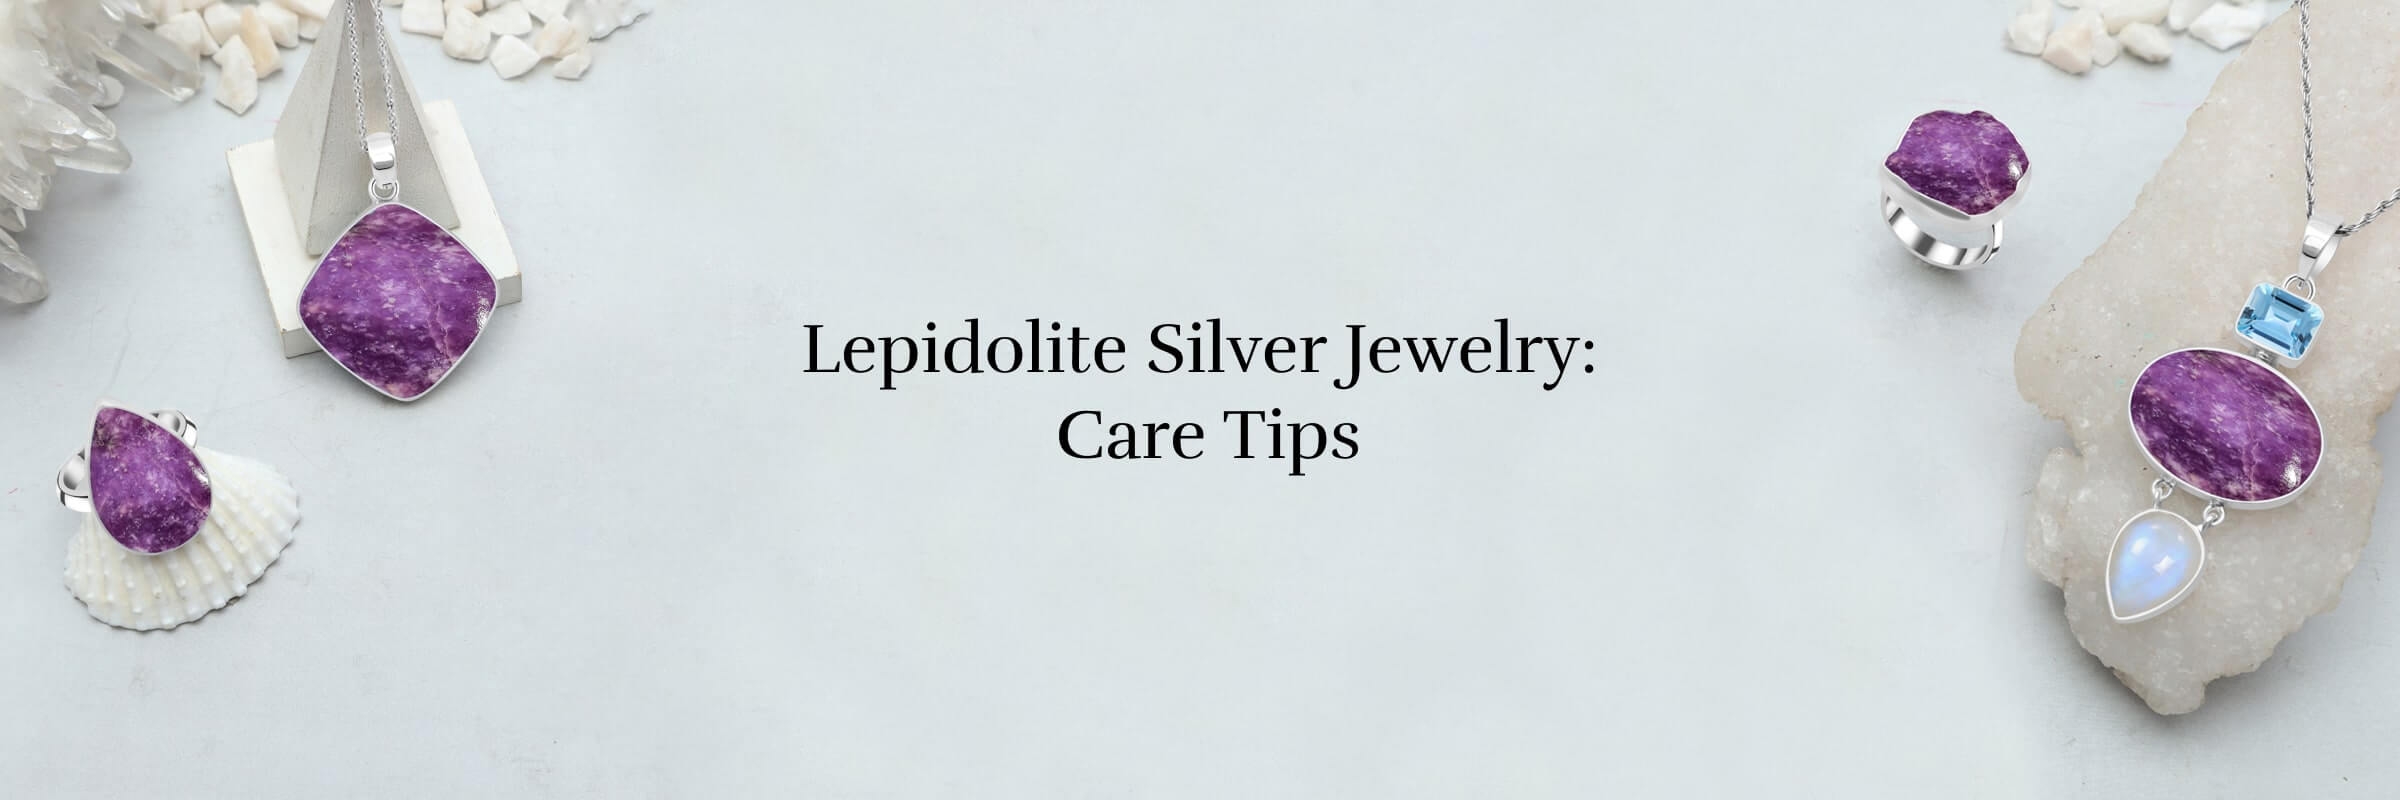 How to Take Care of Your Lepidolite Plain Silver Jewelry